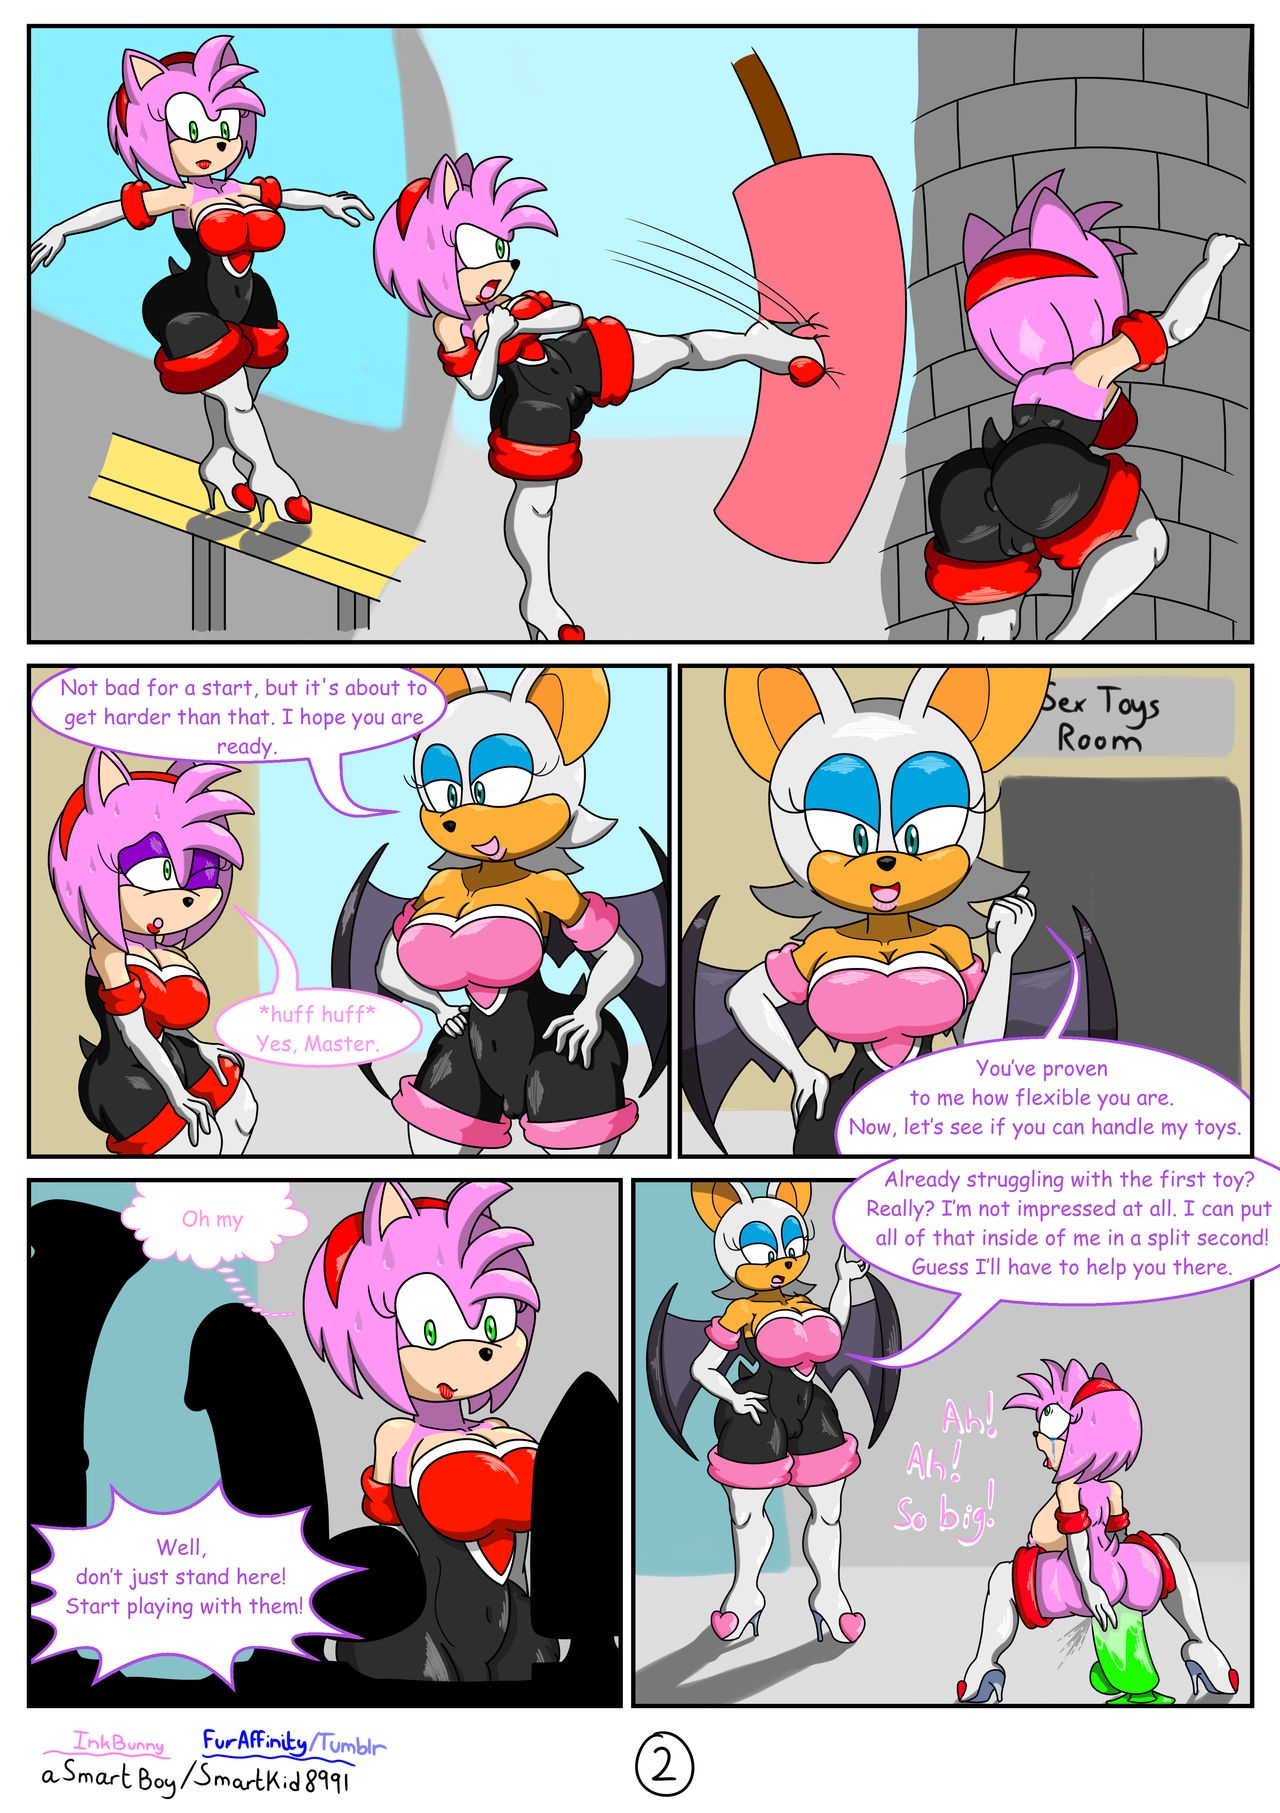 [SmartKid8991] Agent Whore Bootcamp (Sonic The Hedgehog) [Ongoing] 2